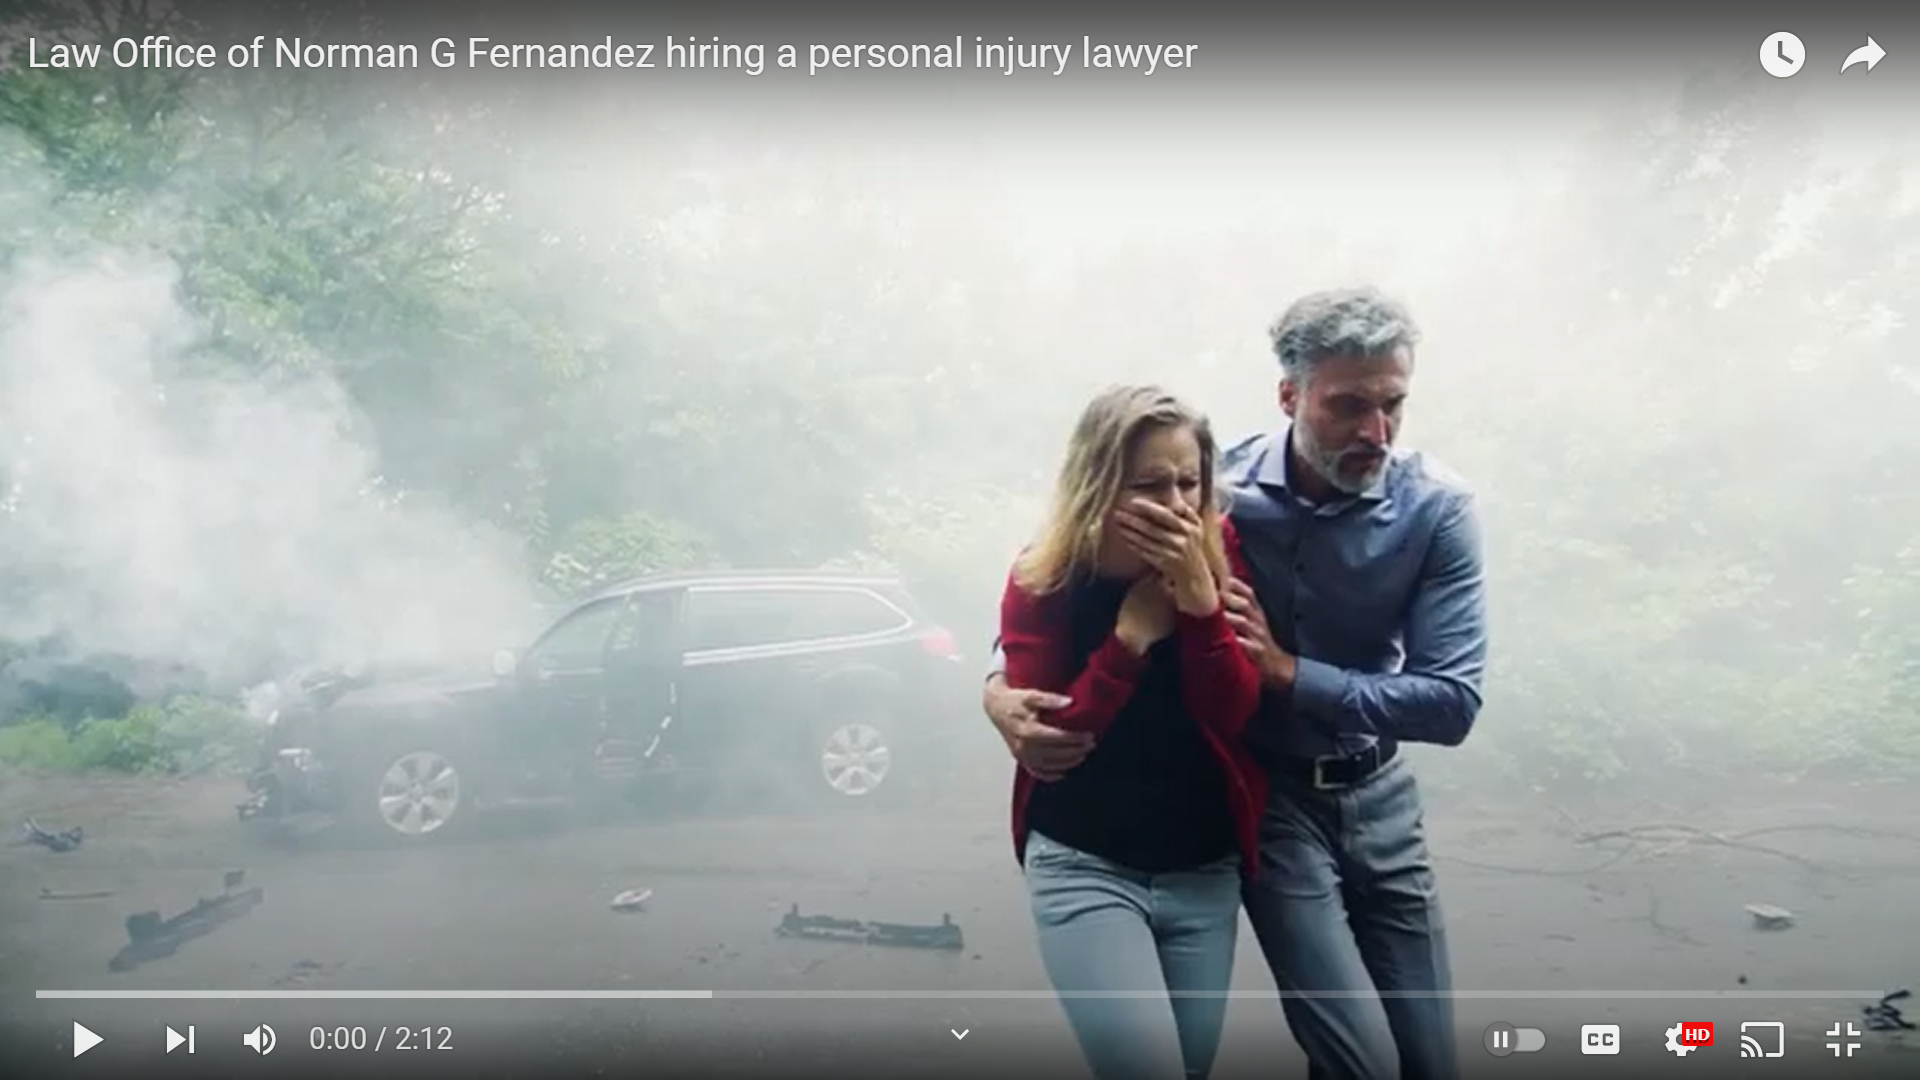 Law Office of Norman G Fernandez hiring a personal injury lawyer